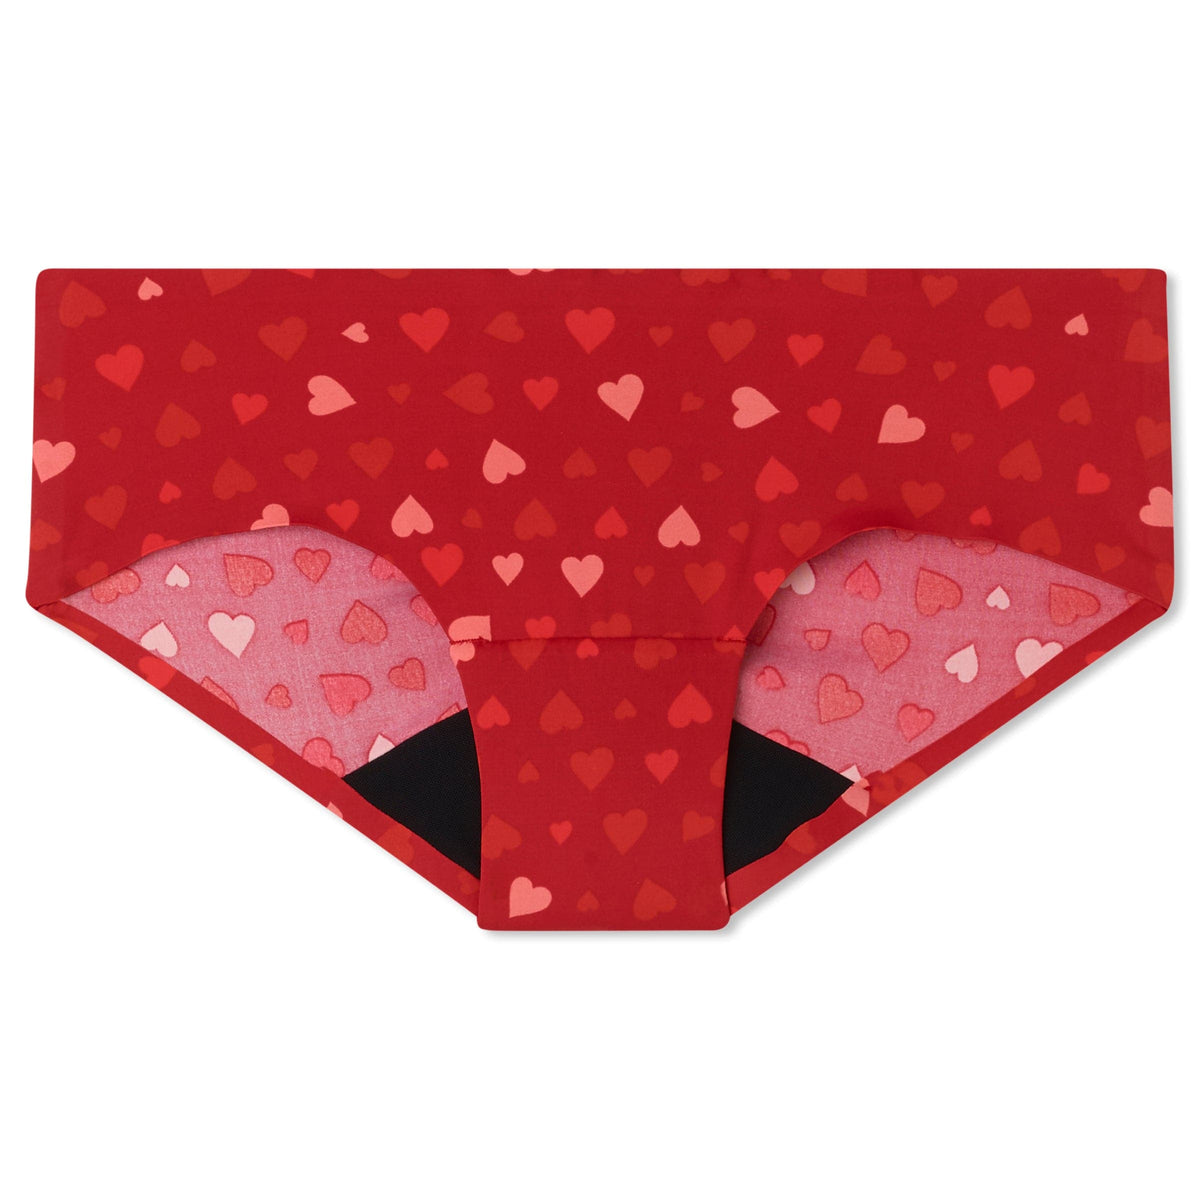 STRAWBERRY WEEKS Parent-Approved Period Underwear for Teens, Empowering  First Period Kit for Girls, School Girls Panties